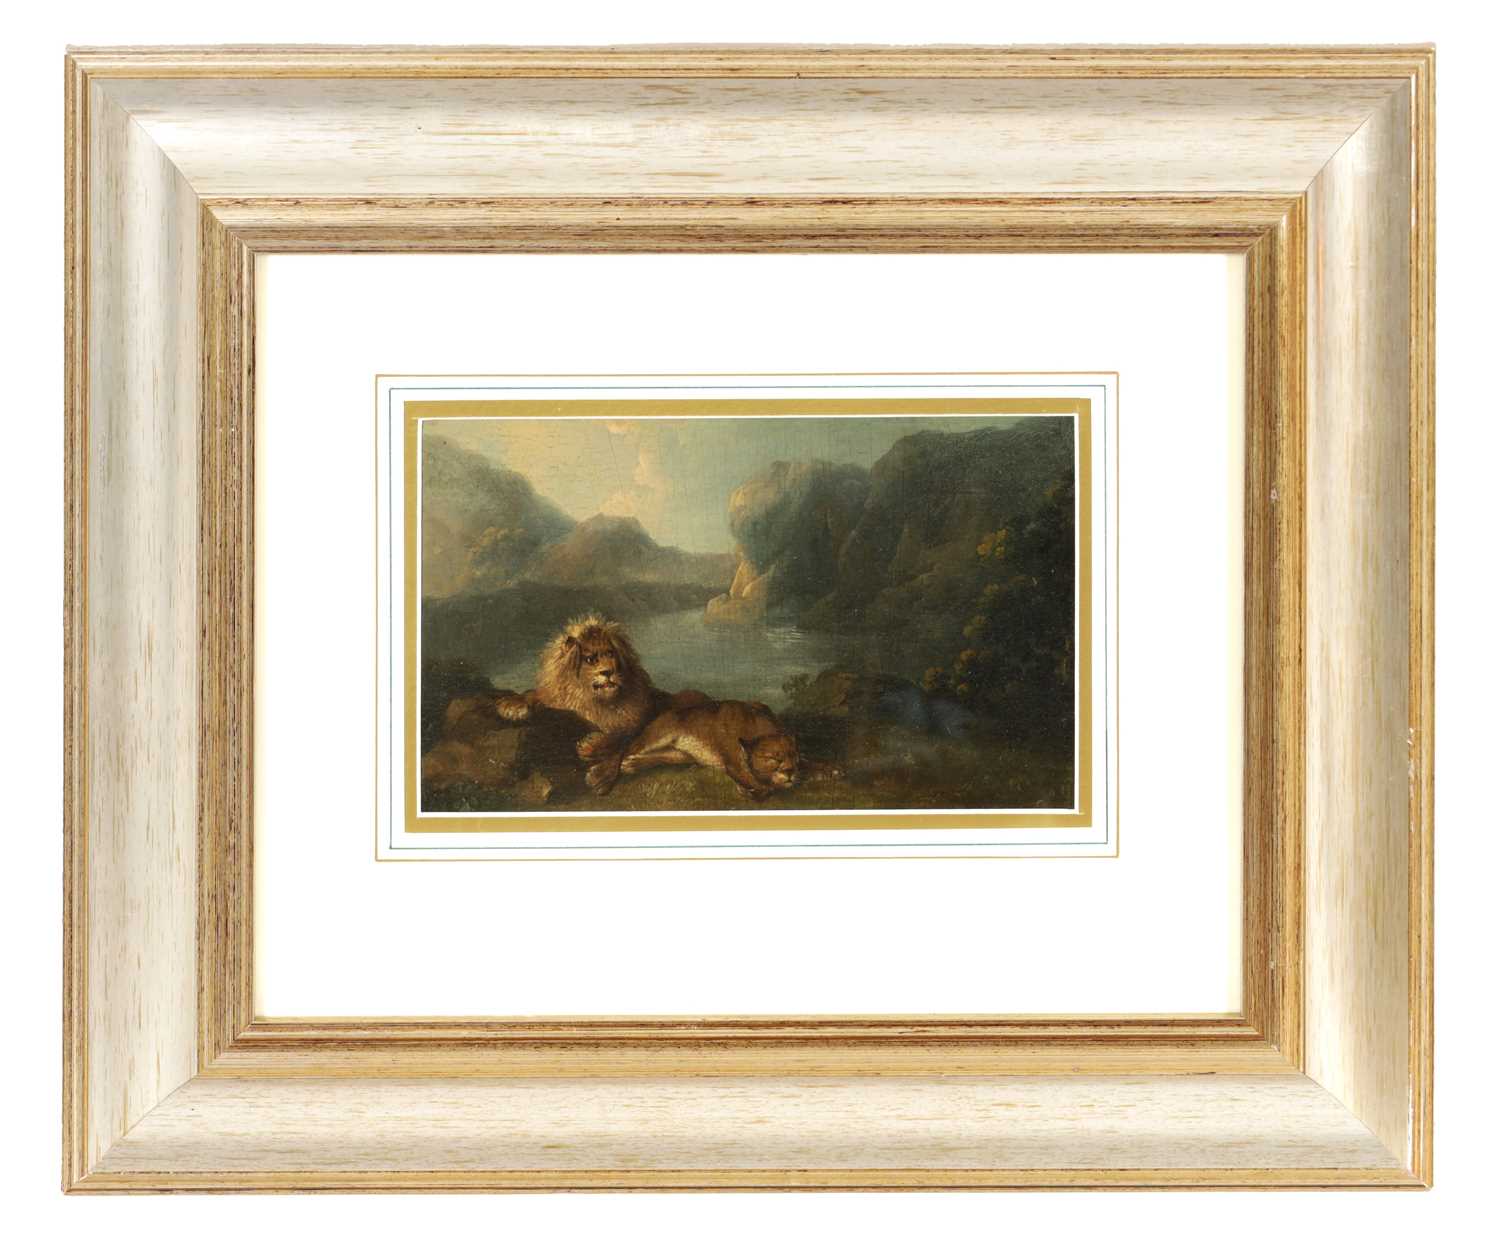 CHARLES TOWNE (1763-1840) A LATE 18TH / EARLY 19TH CENTURY OIL ON OAK PANEL